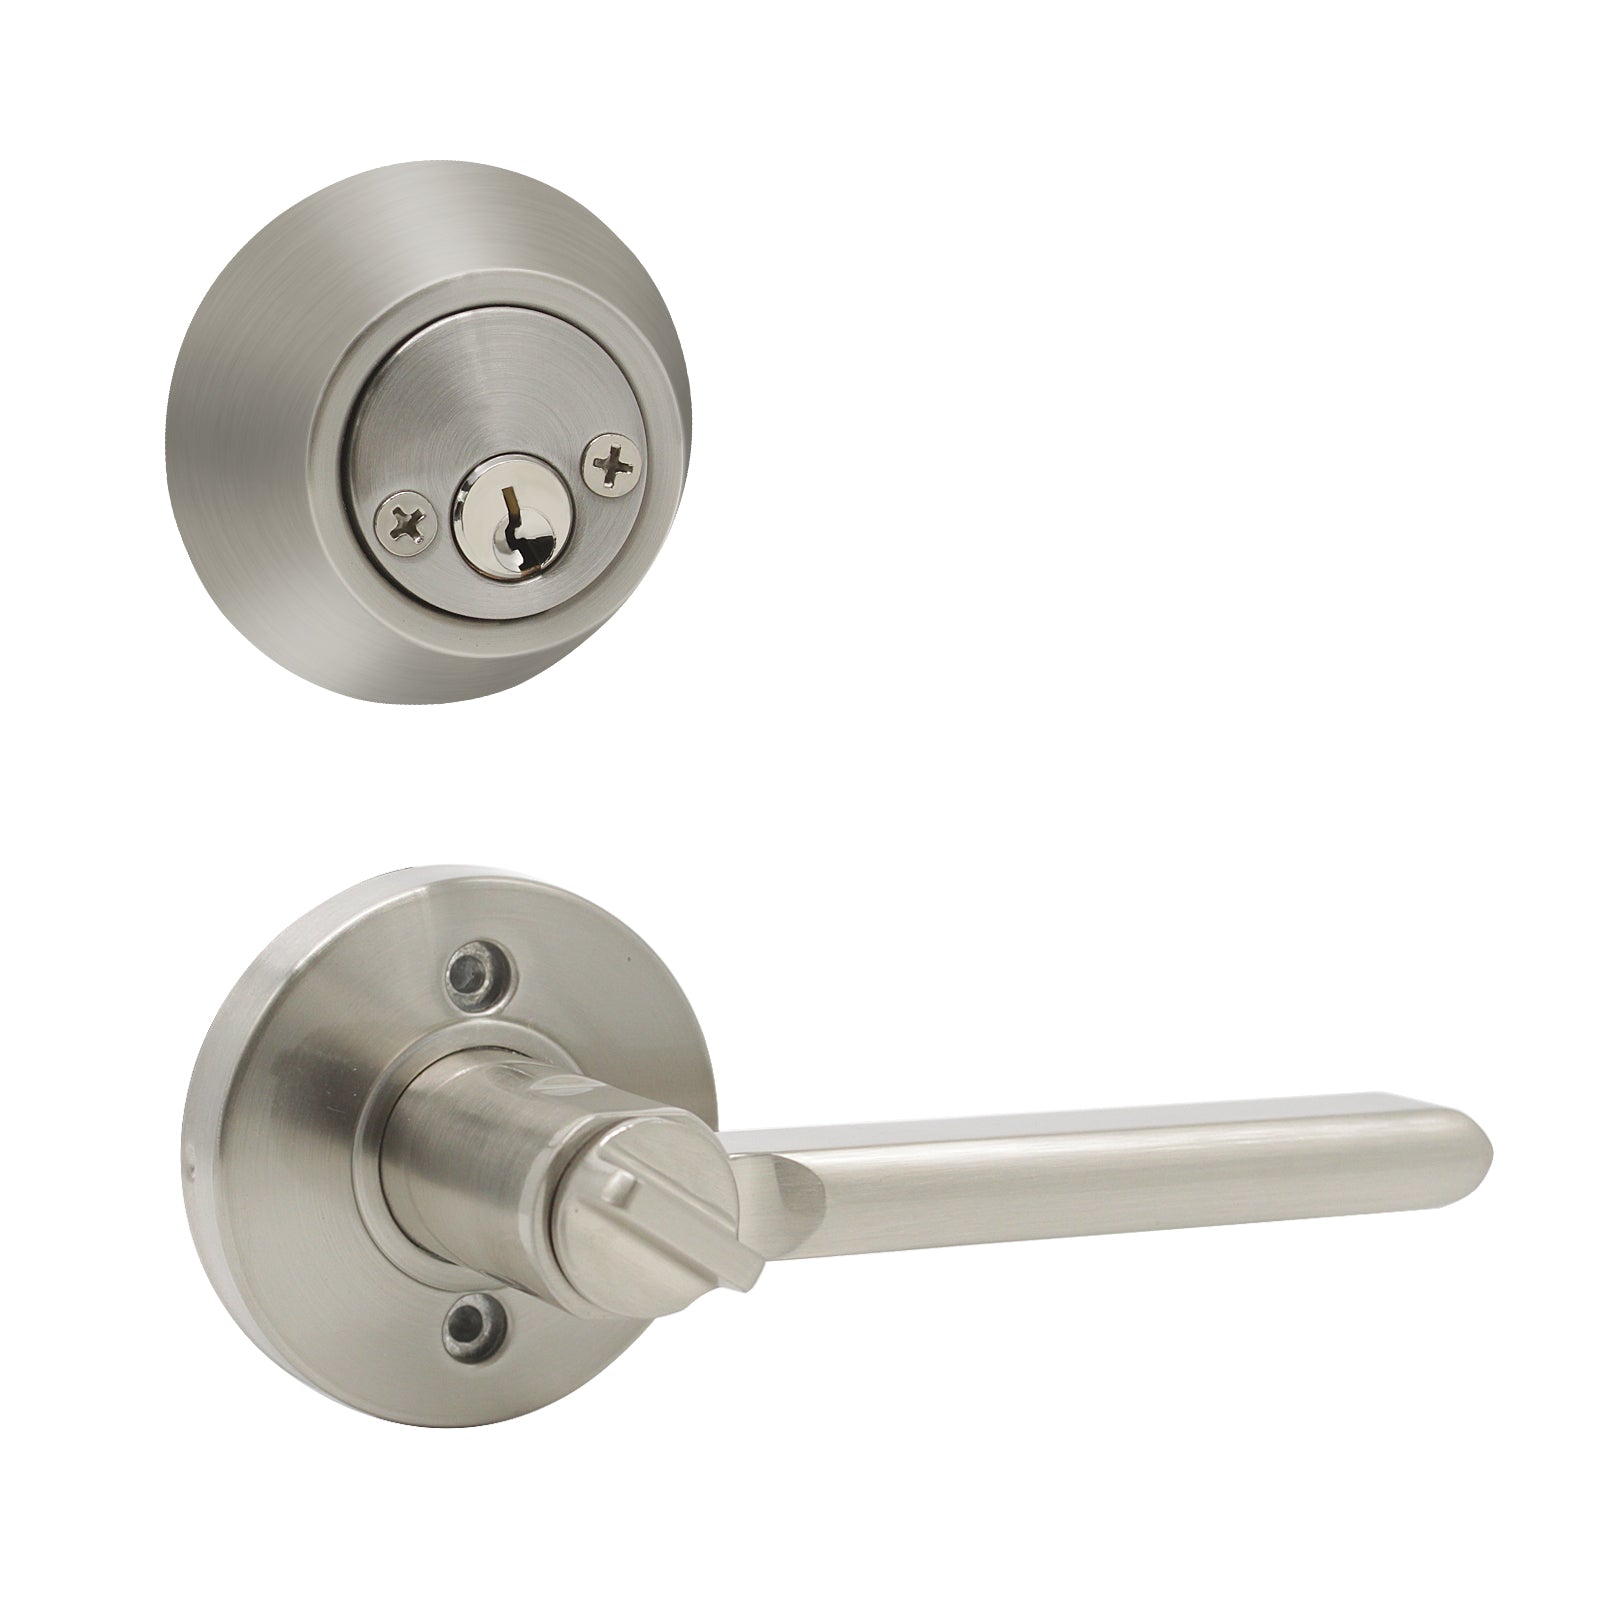 Keyed Entry Door Lever Lock and Double Cylinder Deadbolts Combo Pack (Keyed Alike), Satin Nickel Finish DL1637ET-102SN